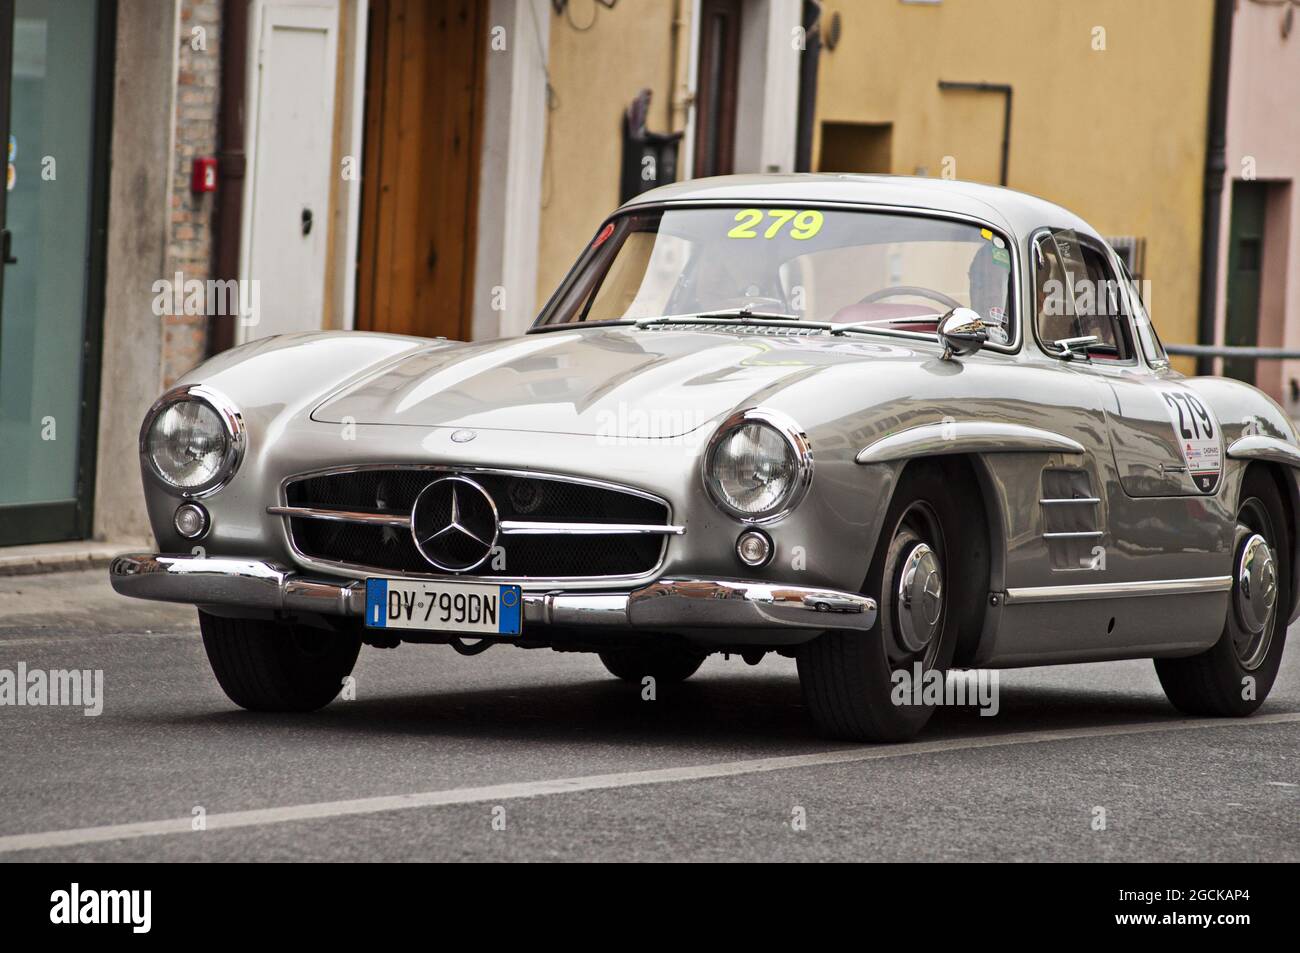 FANO, ITALY - Jun 19, 2014: A scenic view of a Mercedes-Benz 300 SL vintage  car in Fano, Italy Stock Photo - Alamy